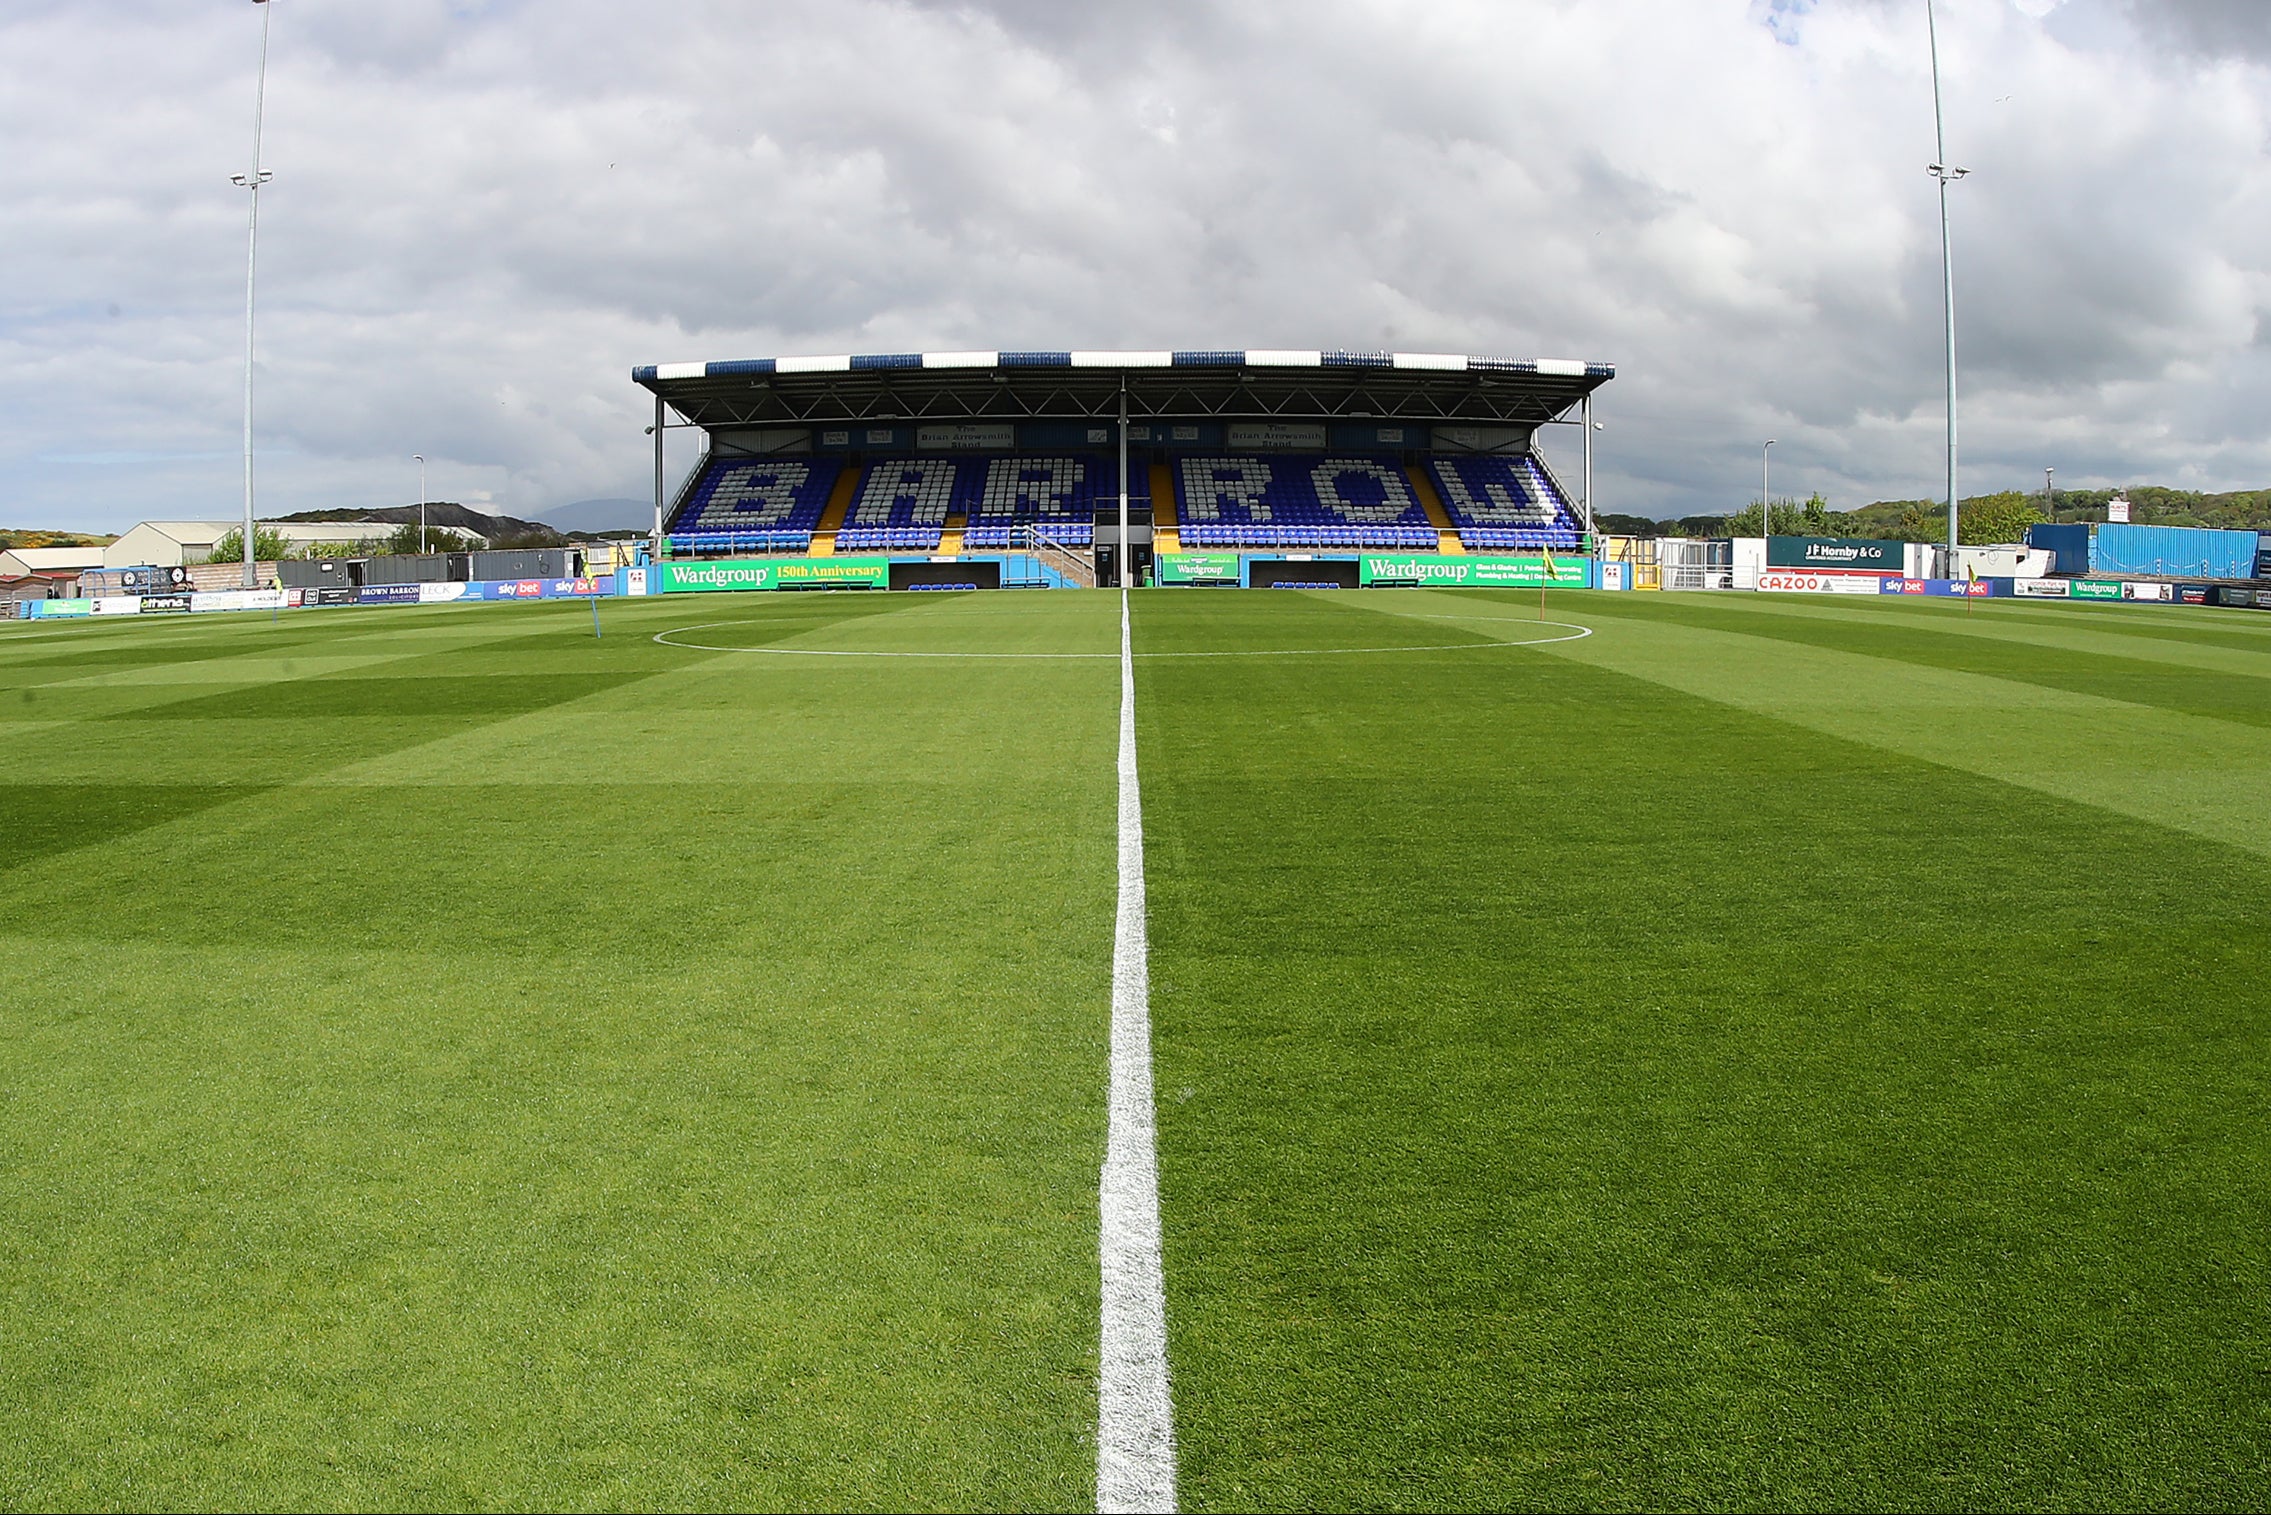 The incident occurred during the game at Barrow’s home ground of Holker Street